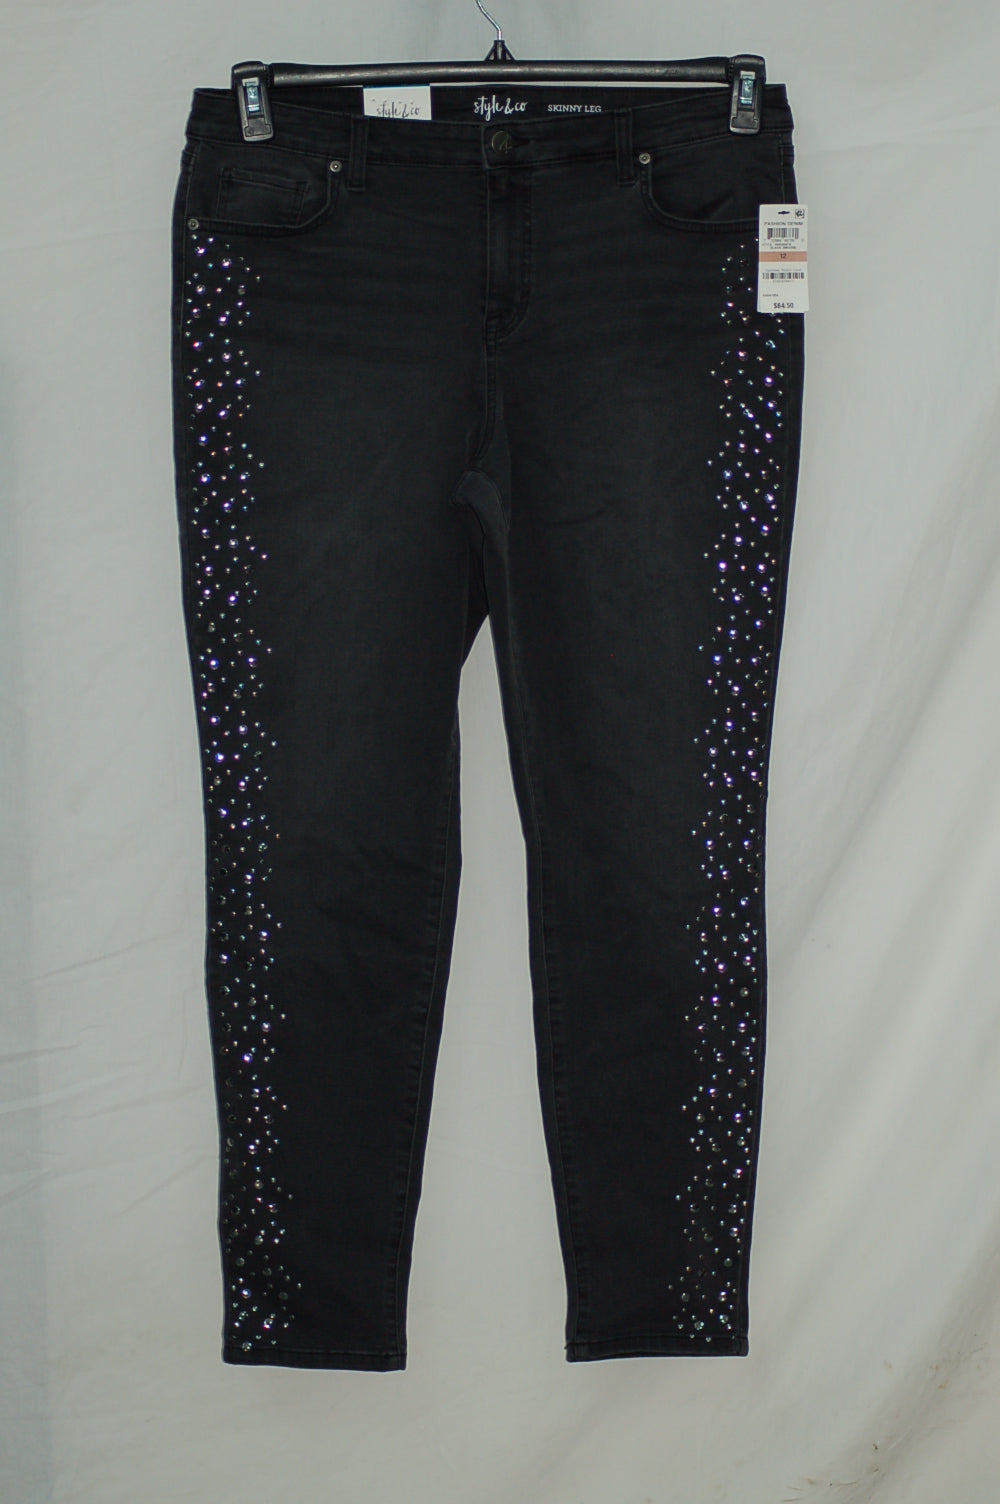 STYLE & CO. SIDE SCATTER SKINNY JEANS BLACK RINSE 8